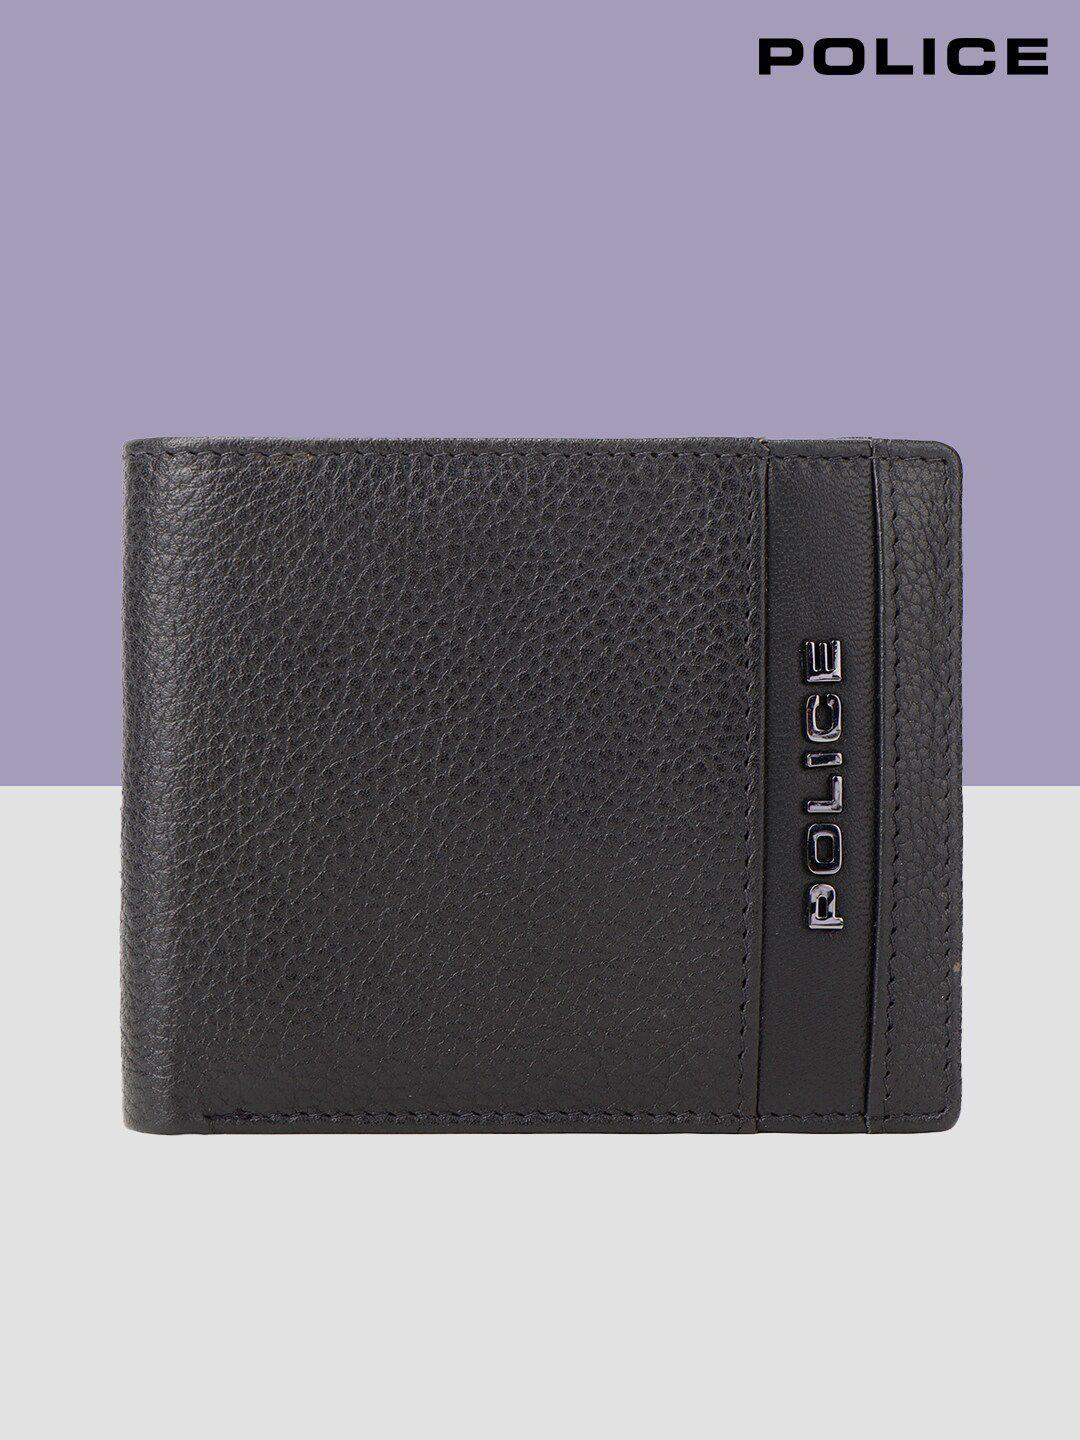 police men leather two fold wallet